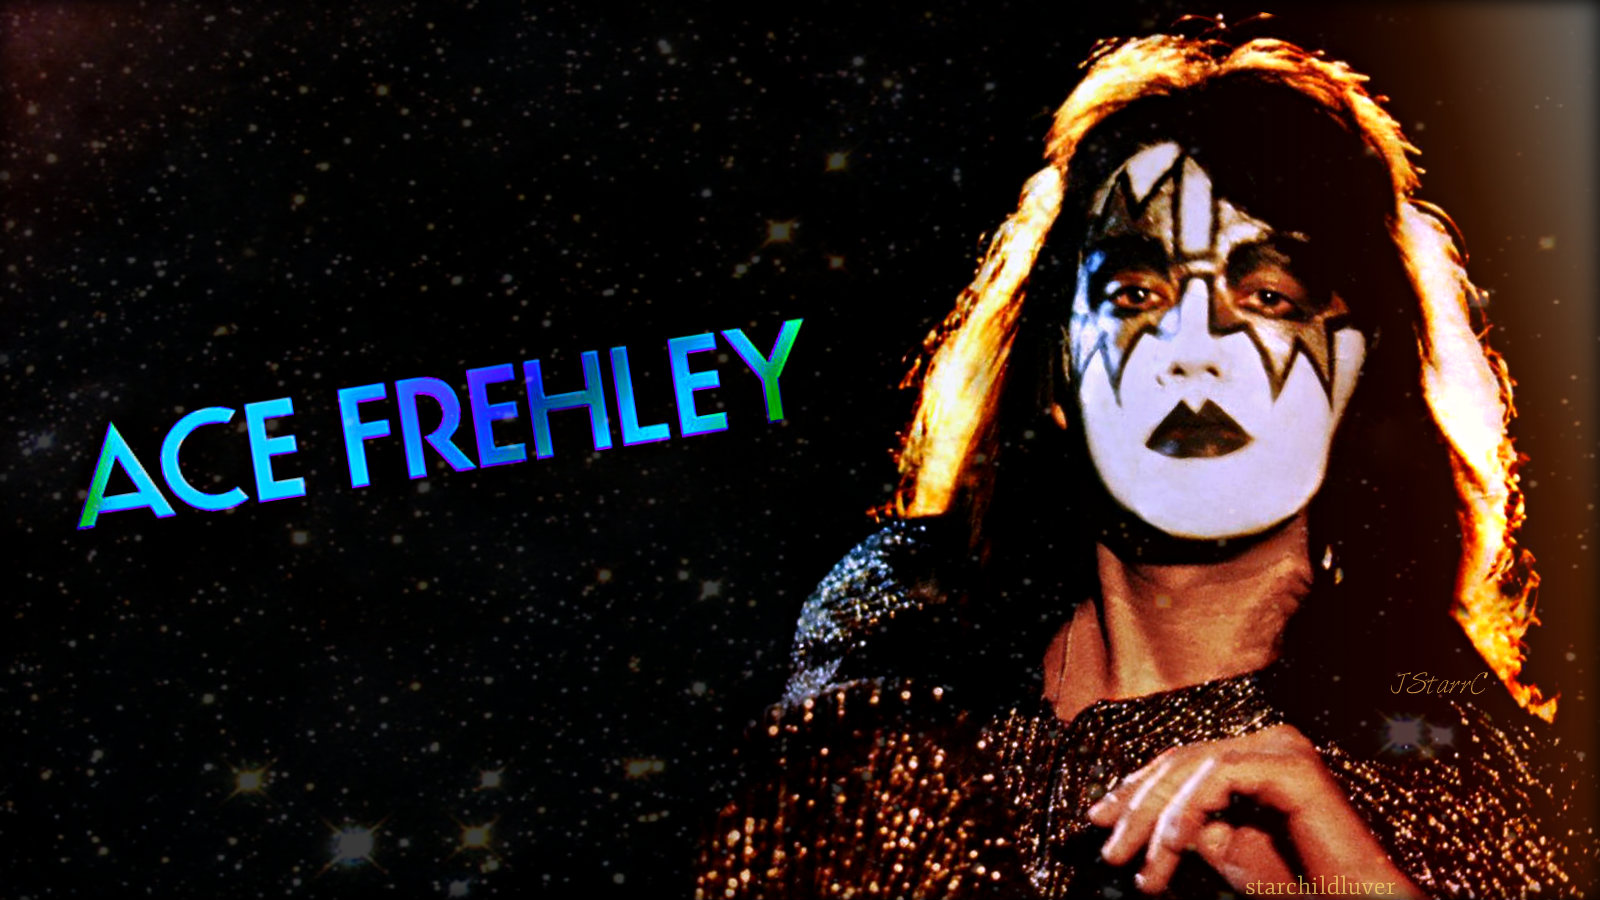 Ace Frehley of Kiss performing at Shoreline Amphitheater 